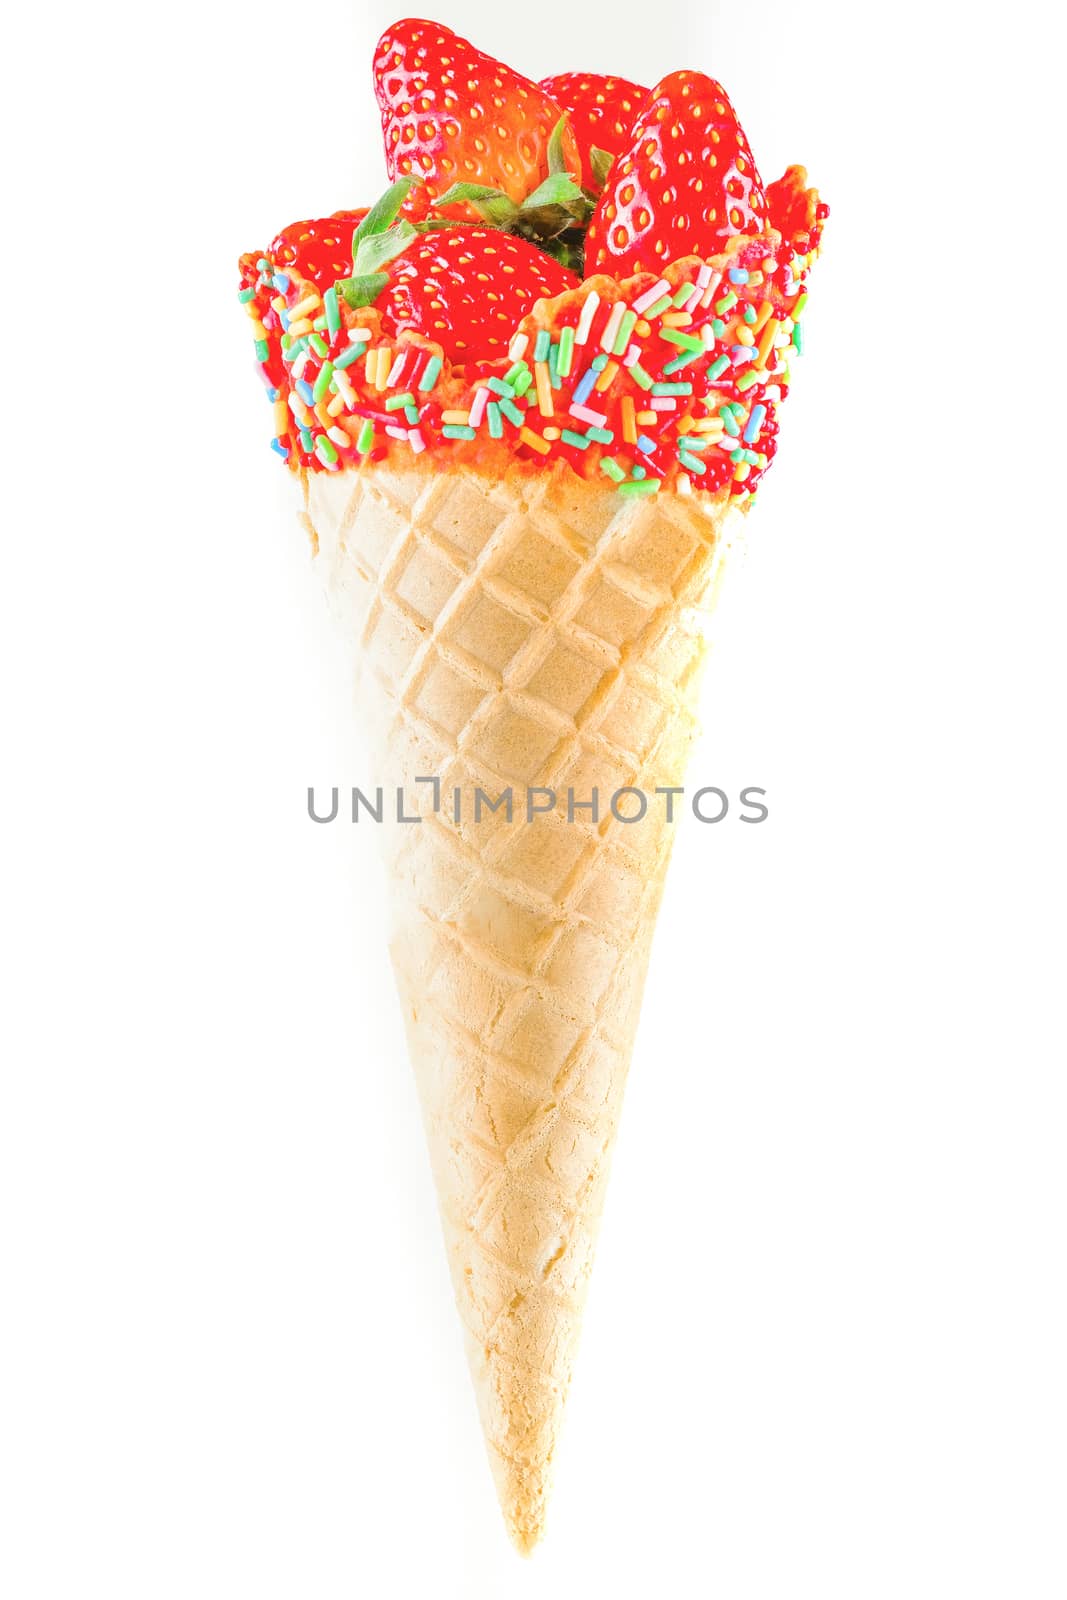 a waffle cone of fresh strawberries with colorful sugary confetti, isolated on white background